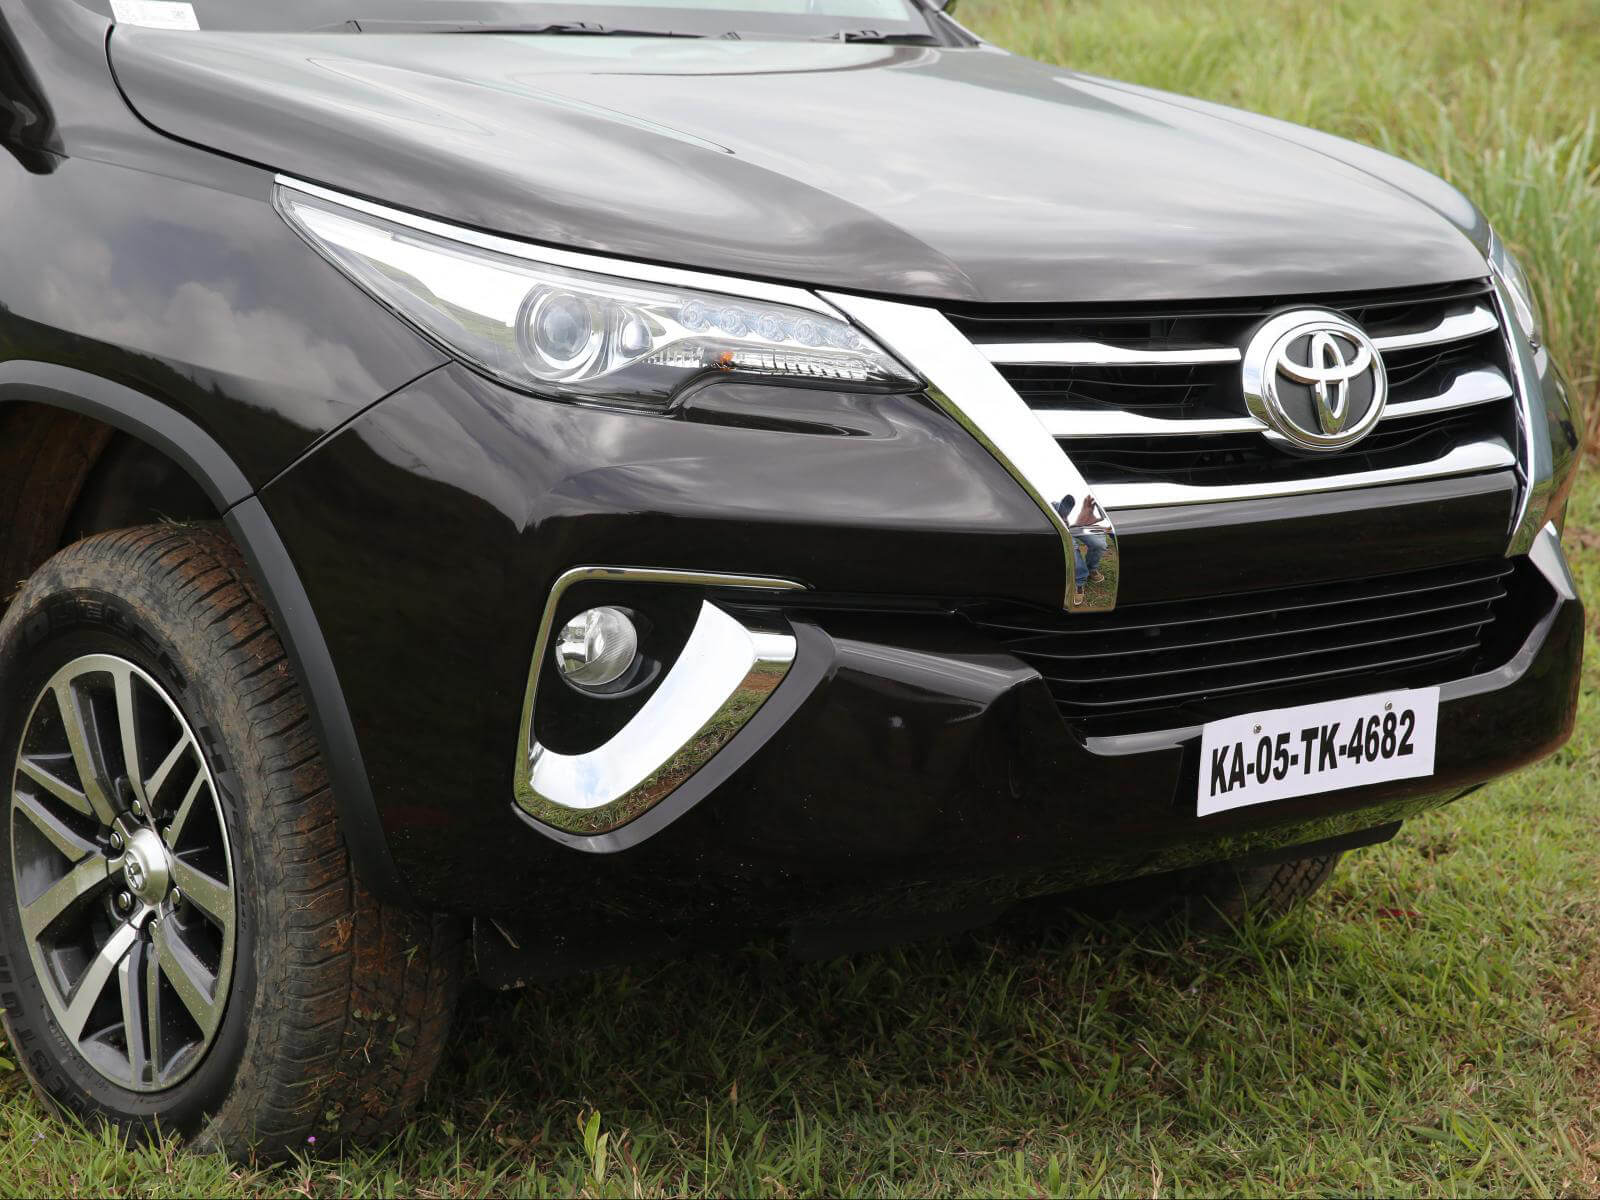 Toyota Fortuner wallpapers download 1600x1200